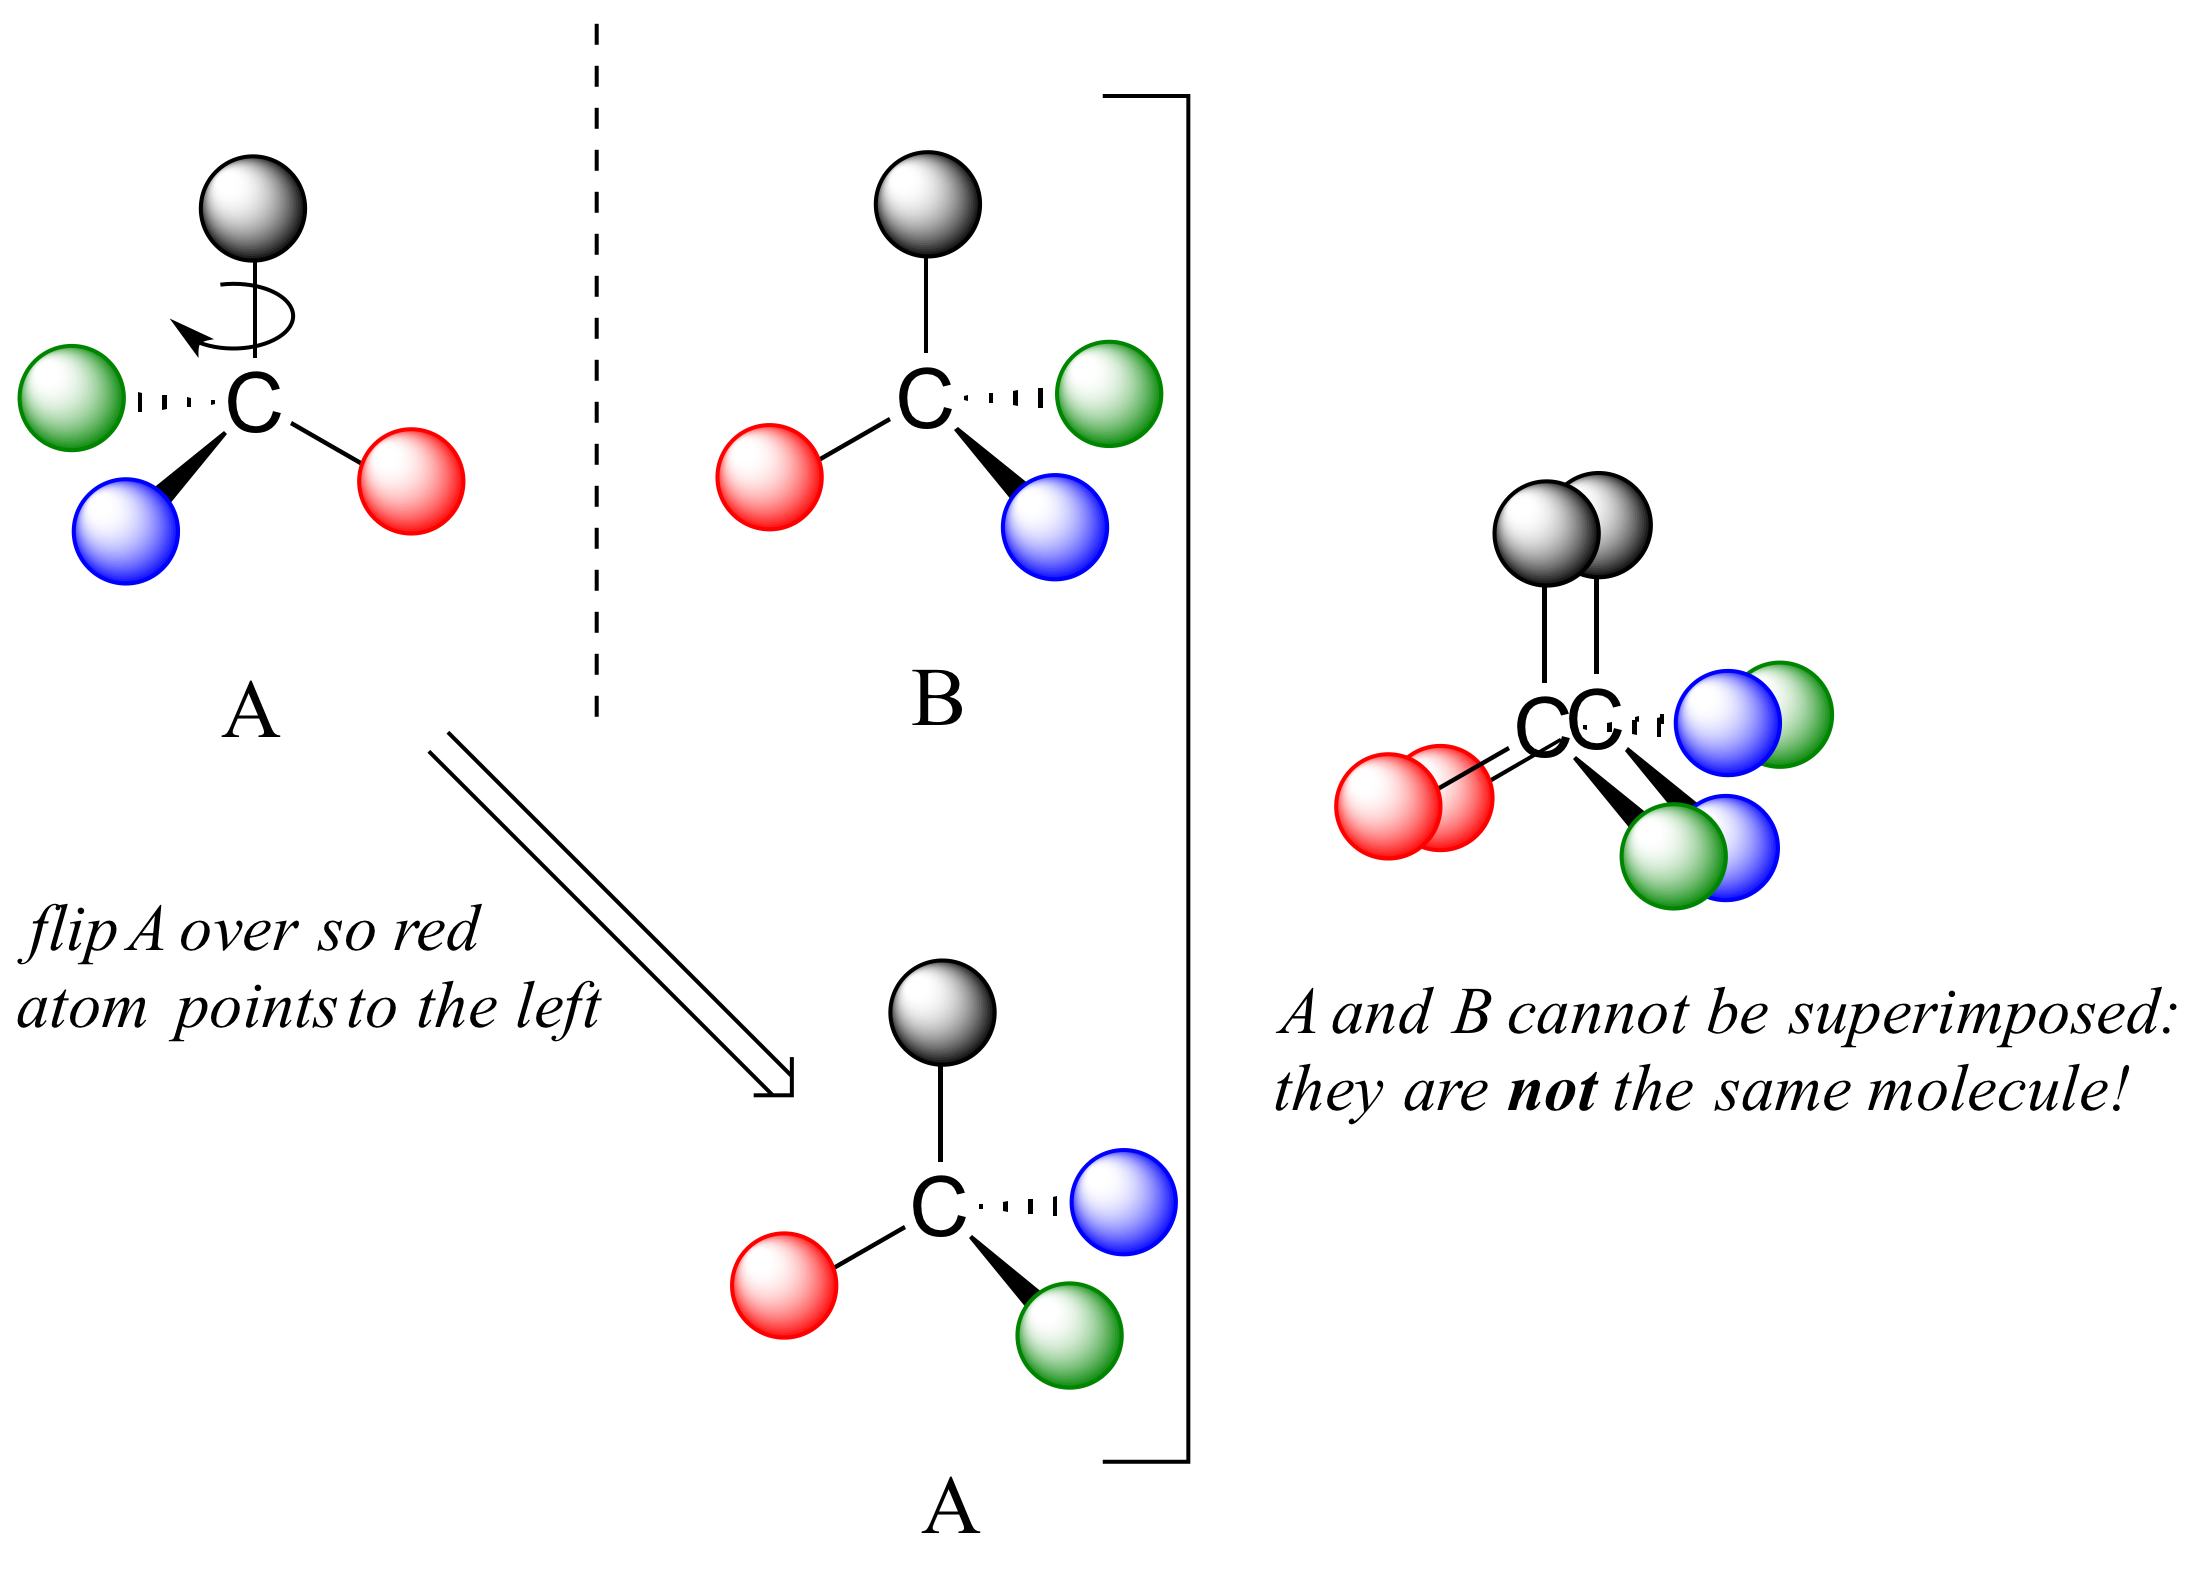 Molecule A starts with red atom on right. It is flipped so red atoms points to the left (like molecule B). Molecule A and B aligned. Blue and green atoms do not line up so A and B cannot be superimposed: they are not the same molecule.